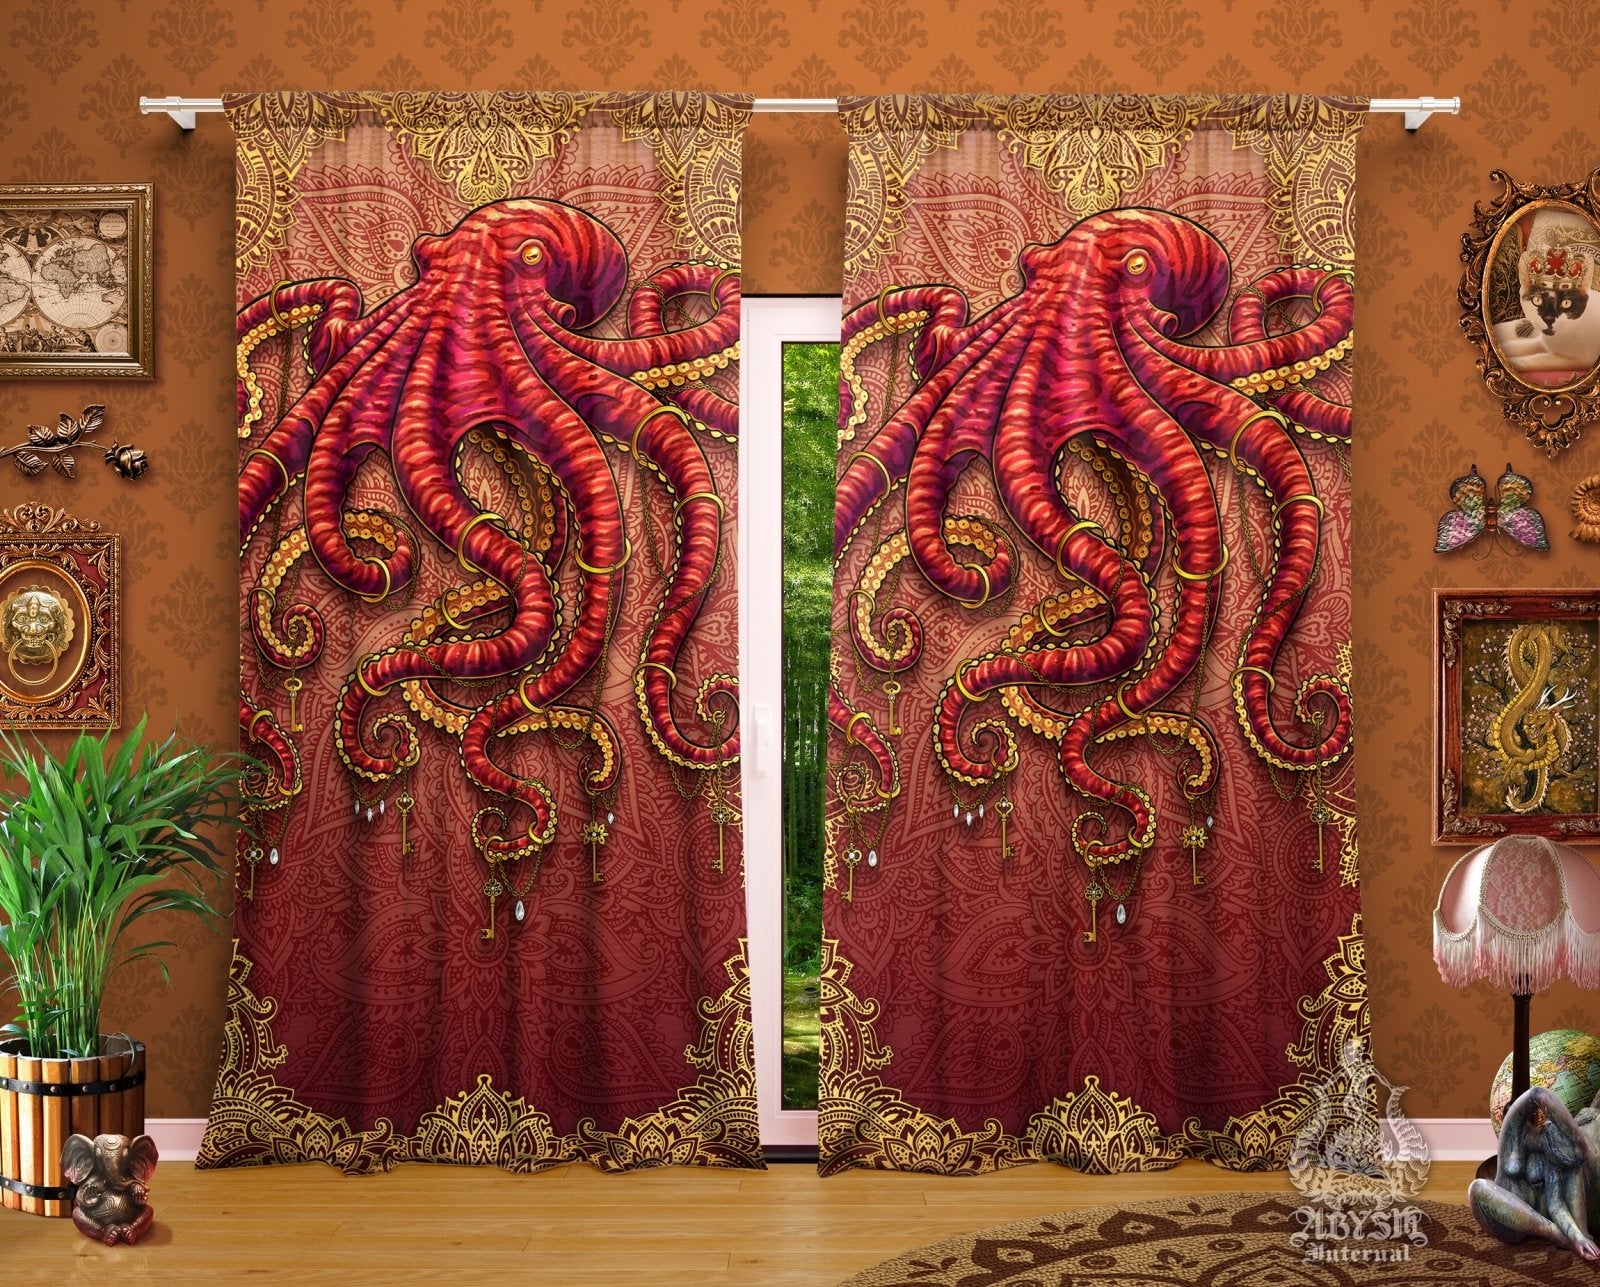 Bohemian Blackout Curtains, Long Window Panels, Hippie Beach House, Indie and Boho Room Decor, Art Print, Funky and Eclectic Home Decor - Octopus, Mandalas - Abysm Internal